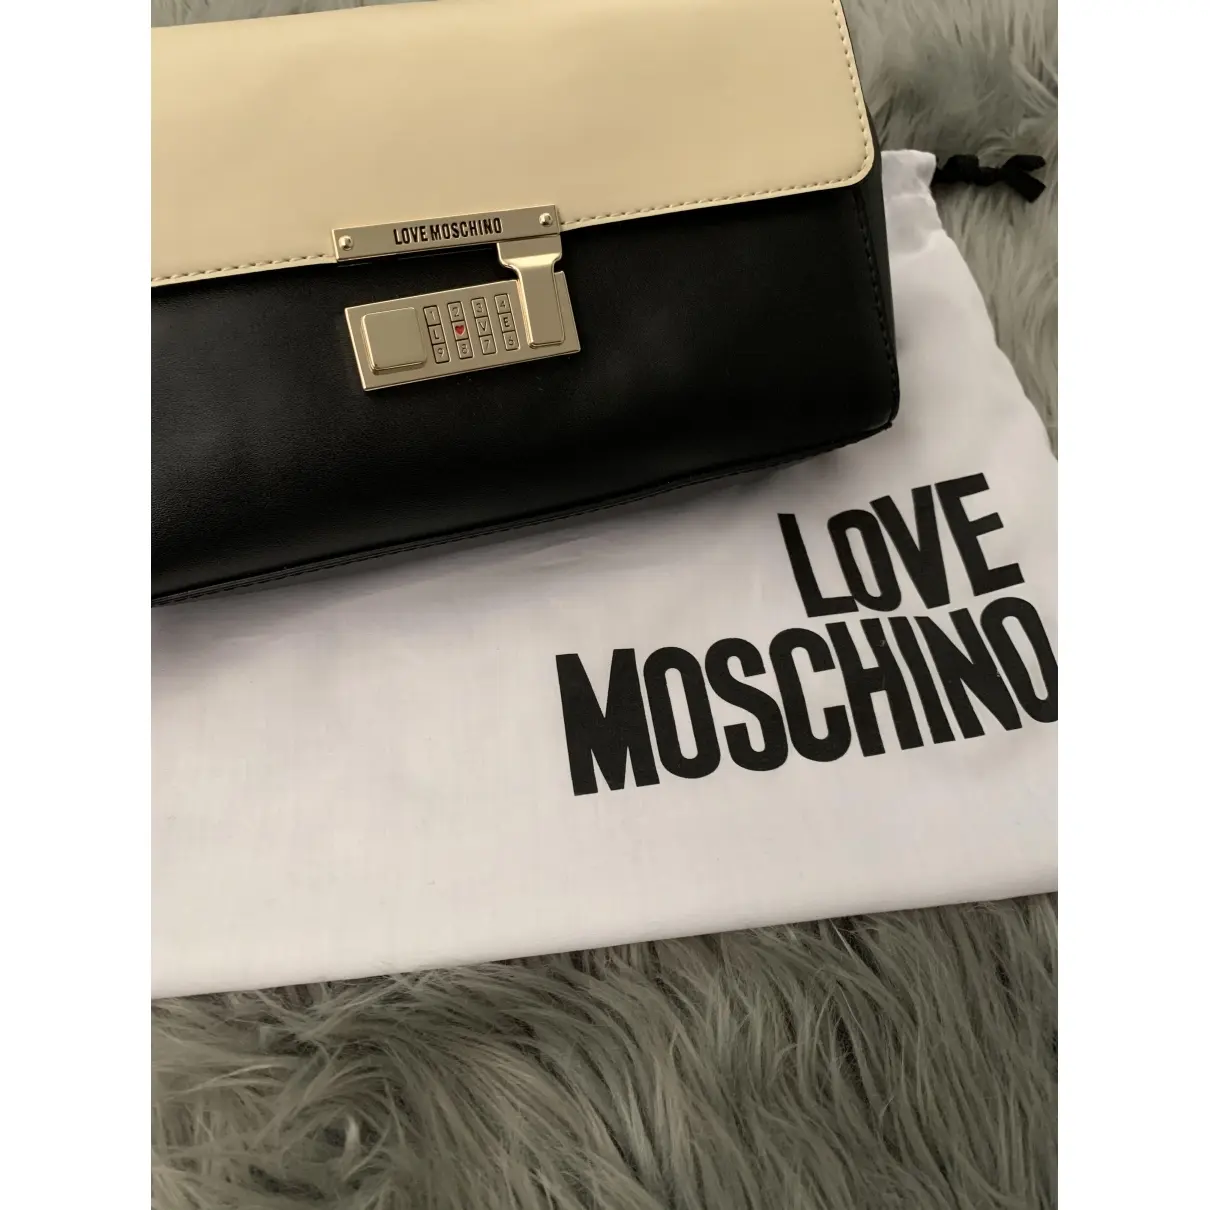 Buy Moschino Love Leather clutch bag online